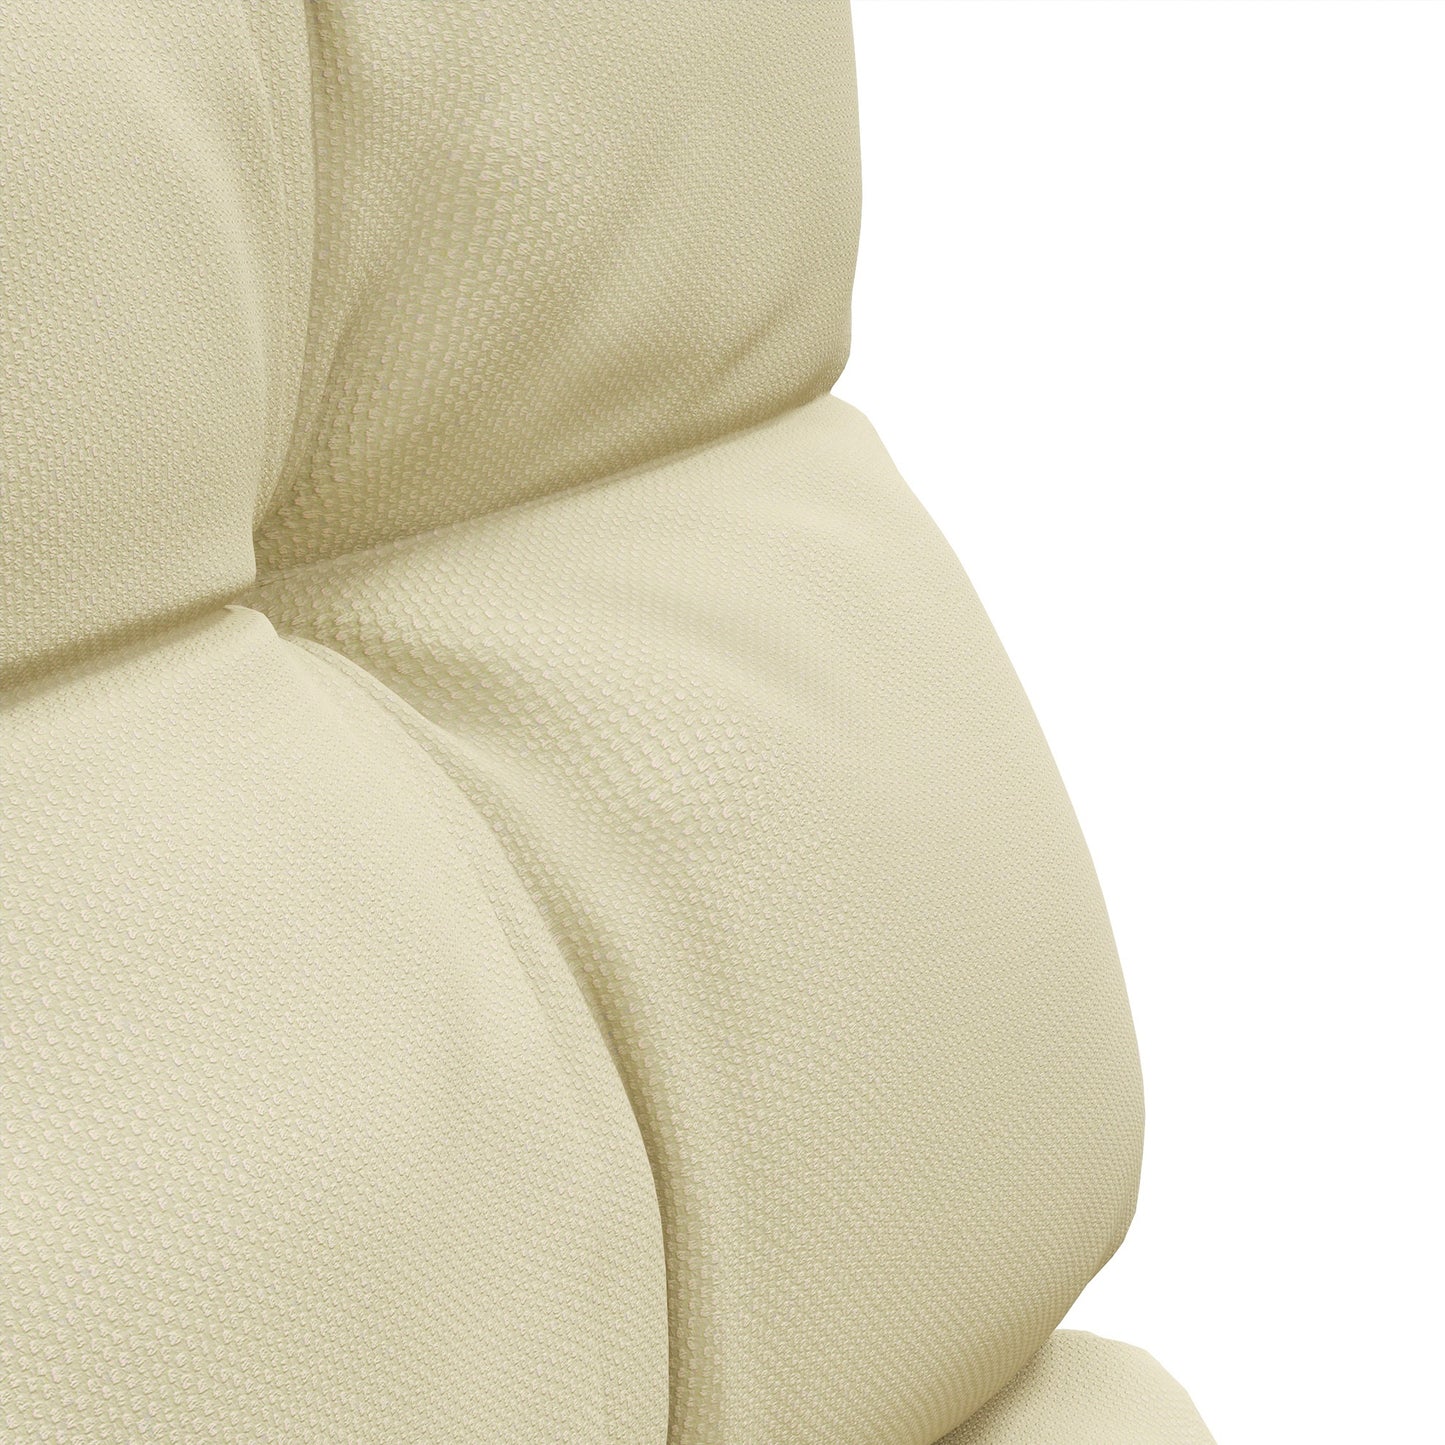 Outsunny Cushion Refresh: Beige Seat & Backrest Set for Patio Chair Comfort